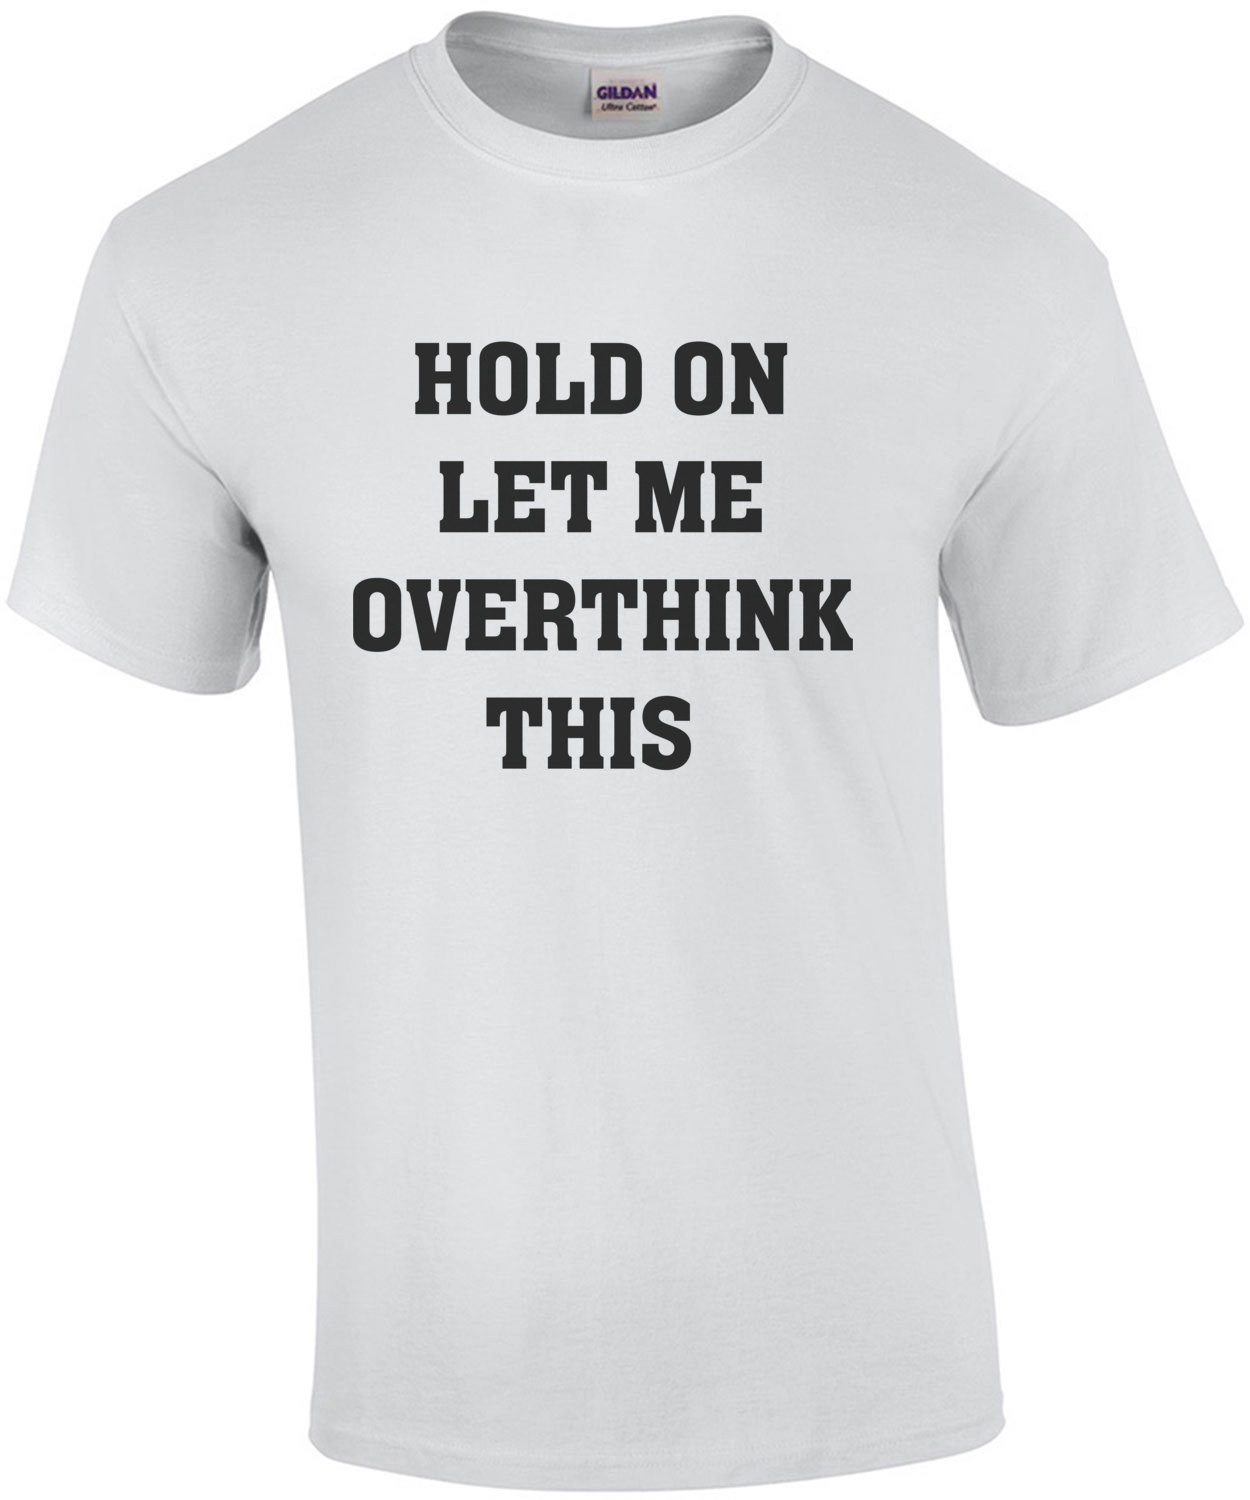 Hold On Let Me Overthink This - Funny sarcasm t-shirt